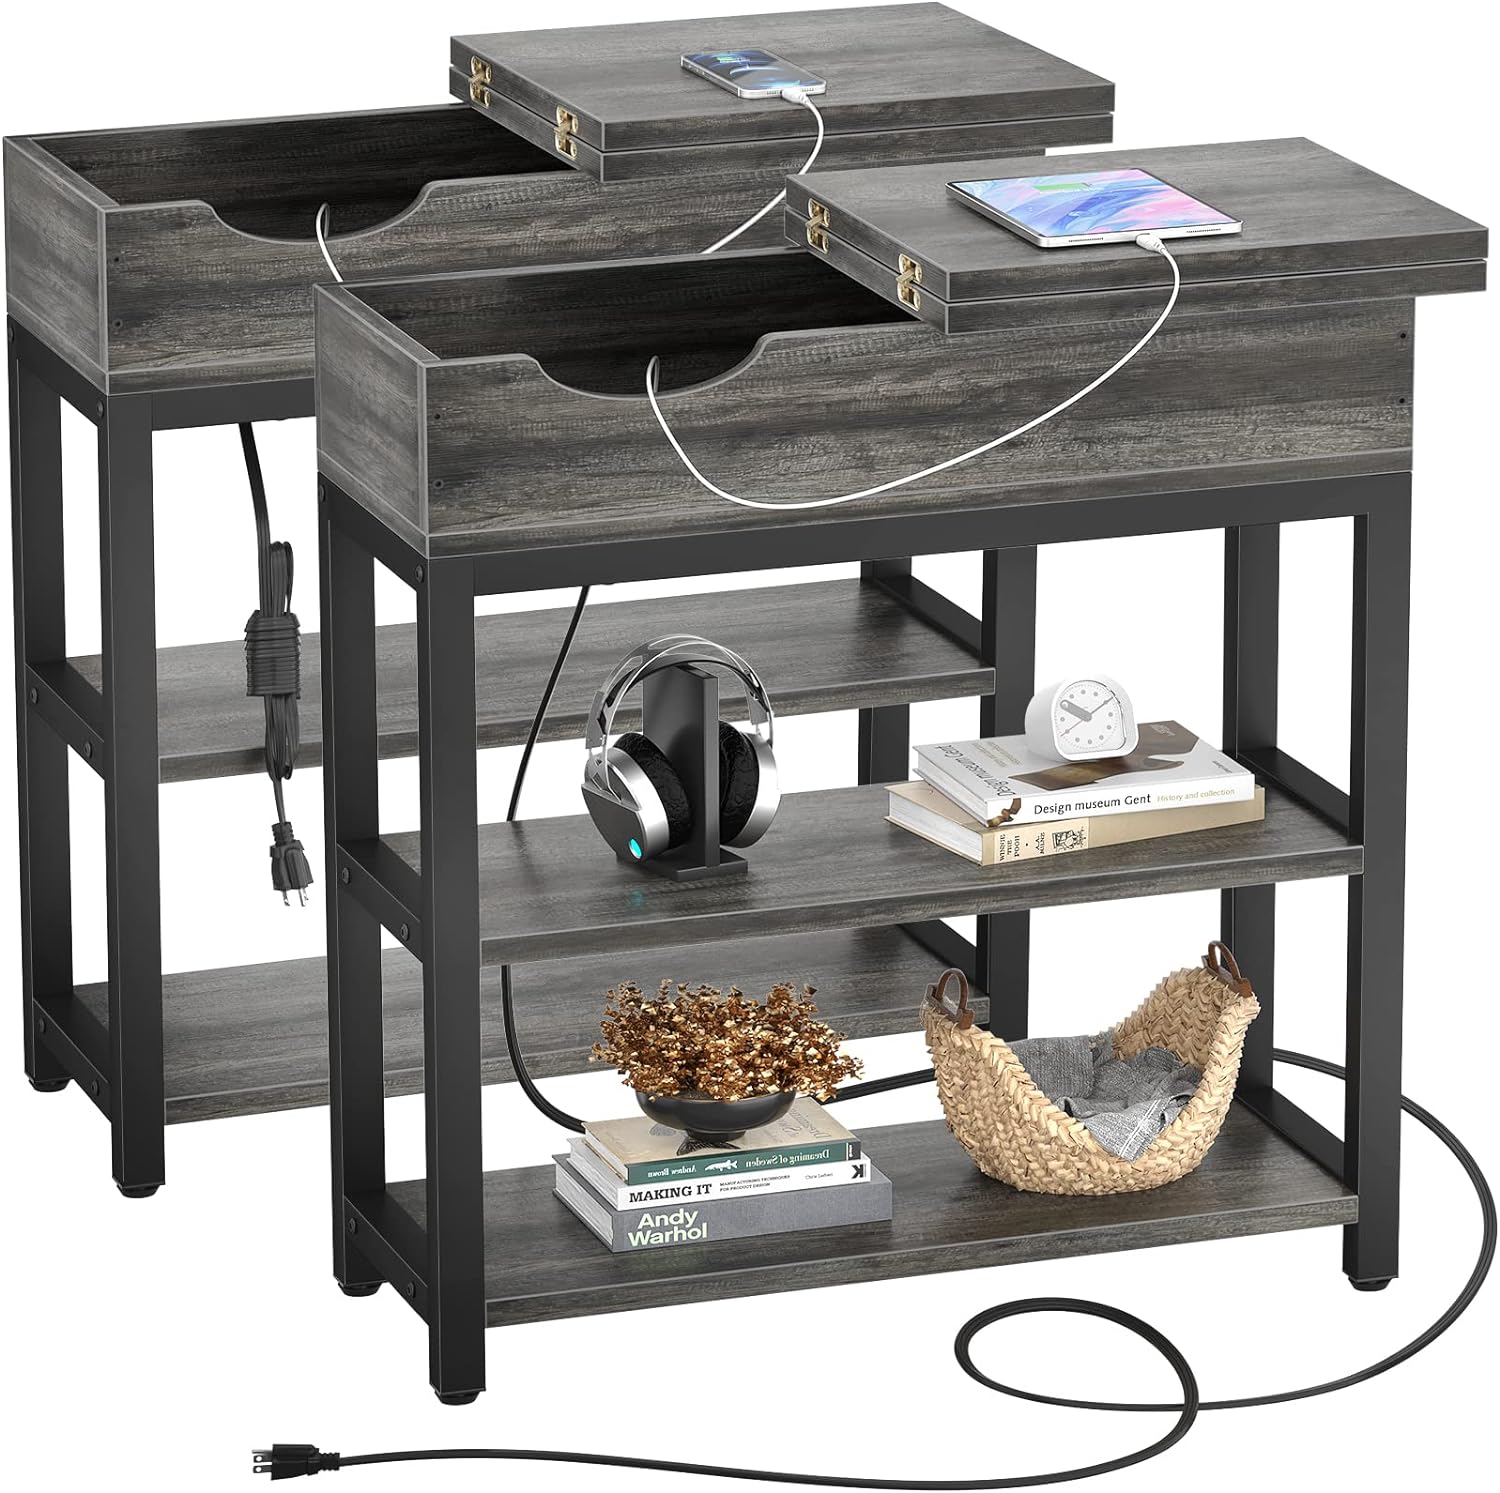 The side table with USB socket is a practical piece of furniture that can bring more convenience to your life. Not only can it be used as a traditional side table, but it also provides a convenient charging service for your electronic devices.